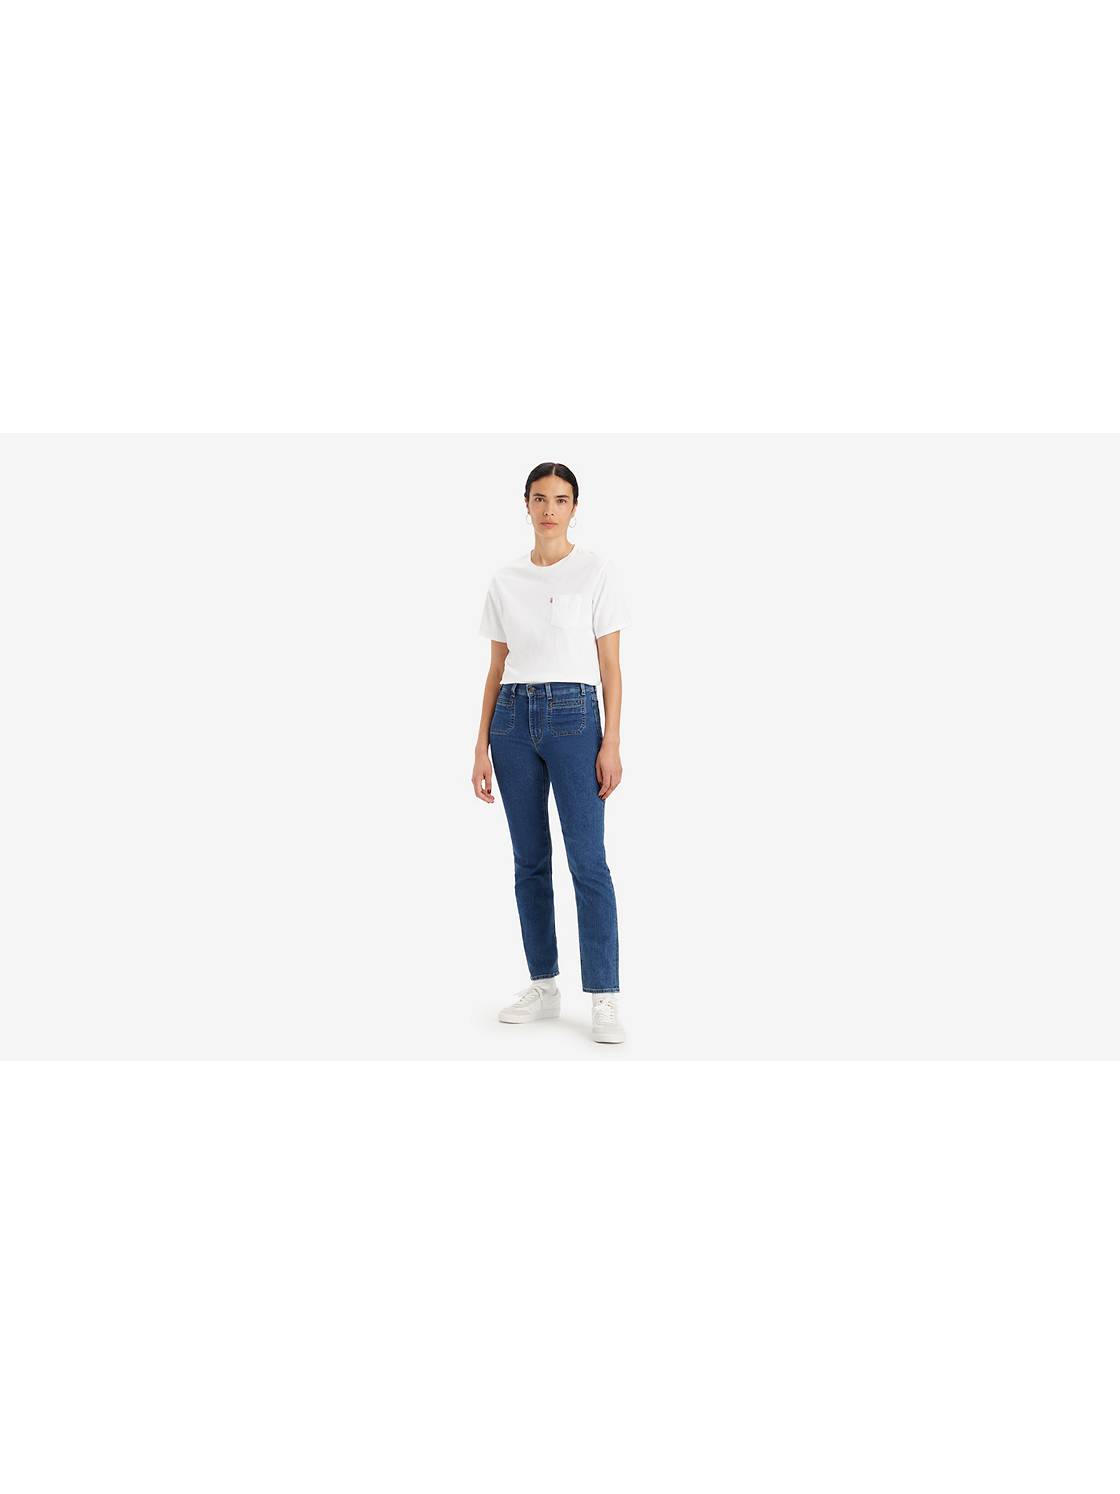 Jeans Recto Mujer Levis